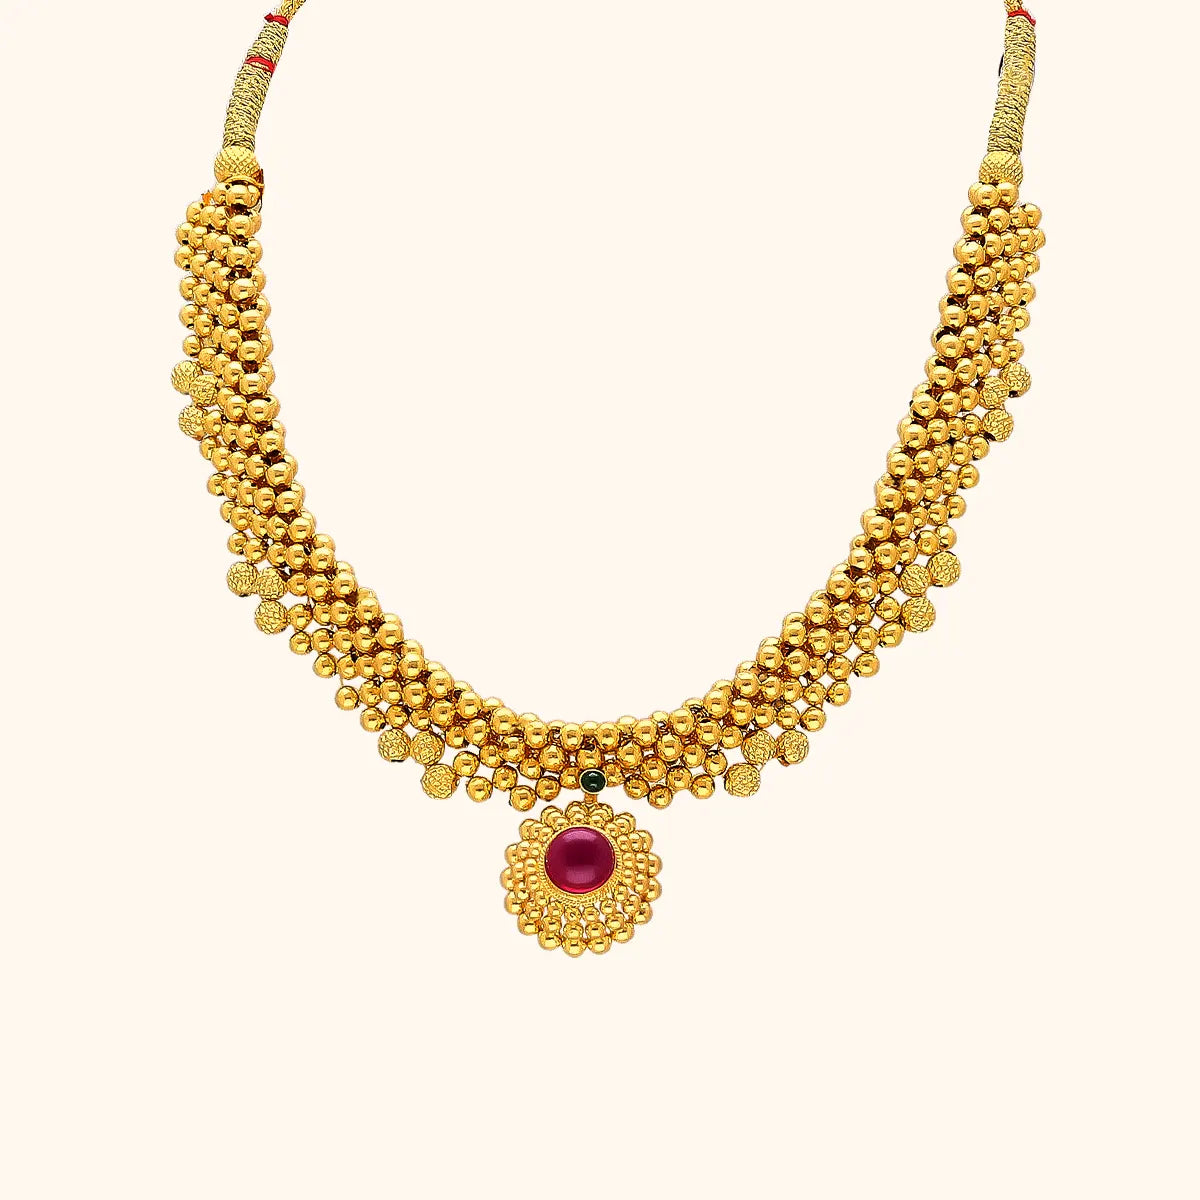 SPE Gold - Latest Gold Design Necklace With Matching Earrings